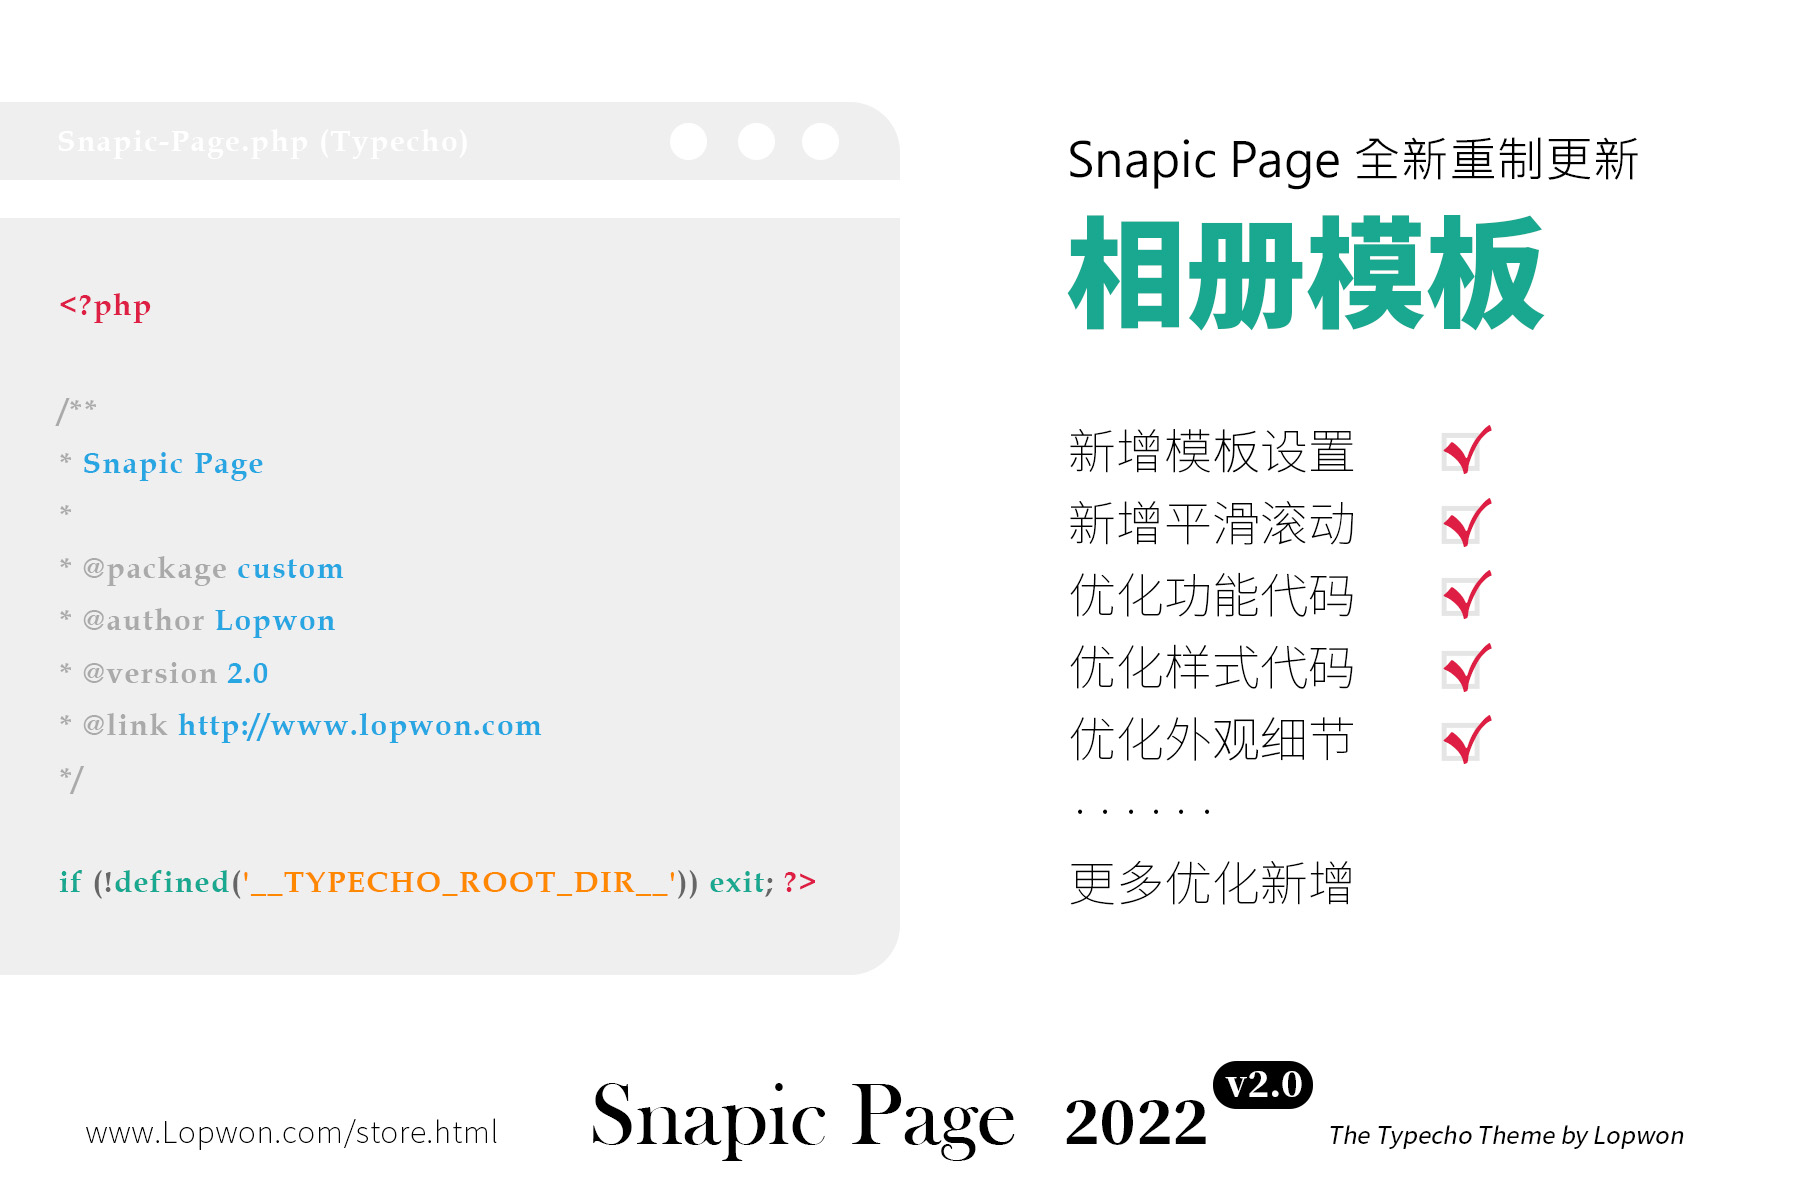 Snapic Page 2022 使用文档